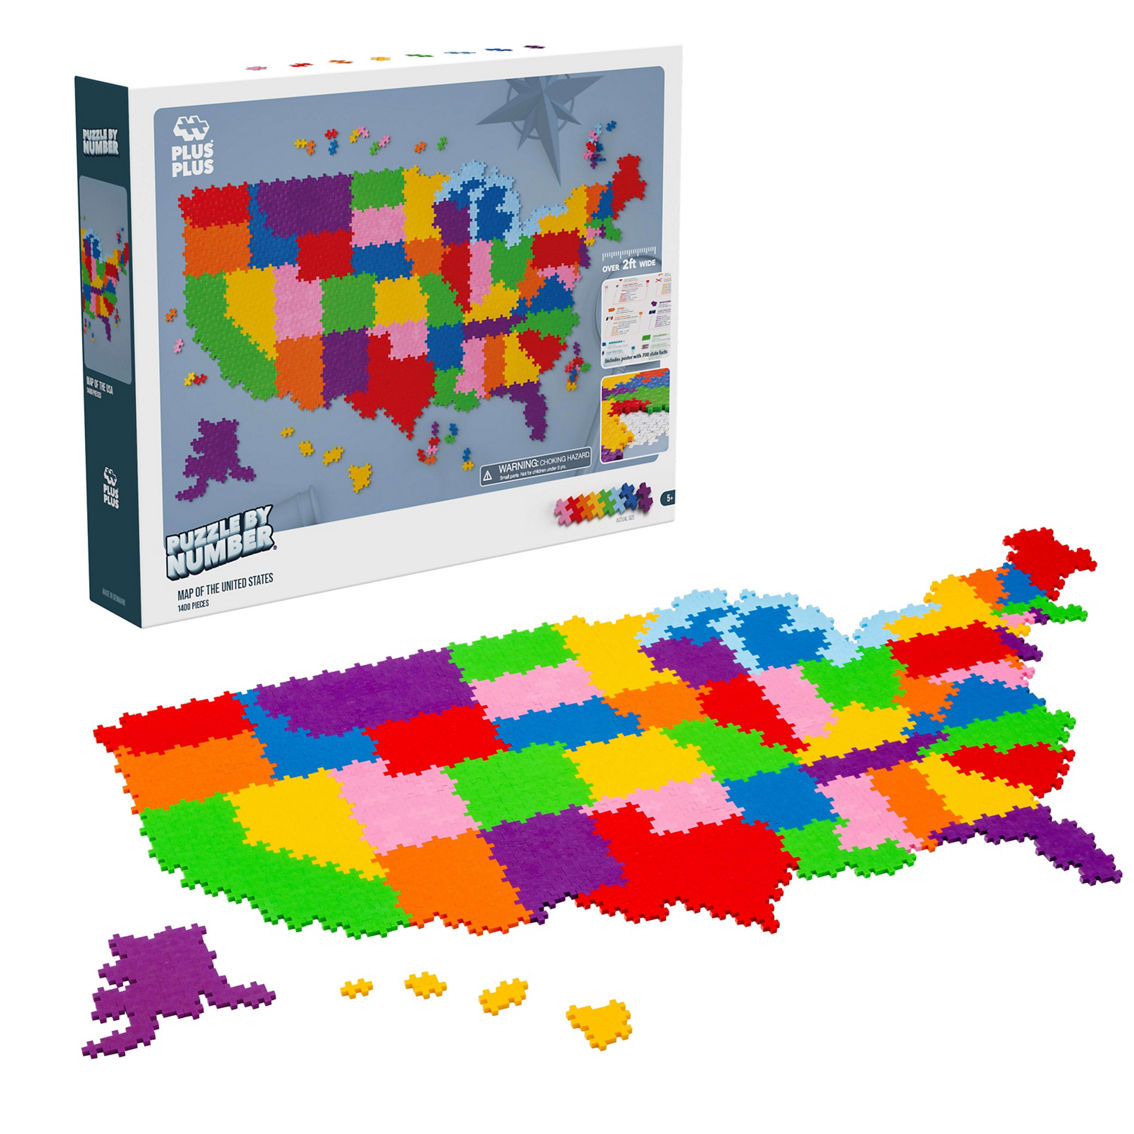 Plus-Plus Puzzle By Number - Map of the United States: 1400 Pcs - Image 2 of 5